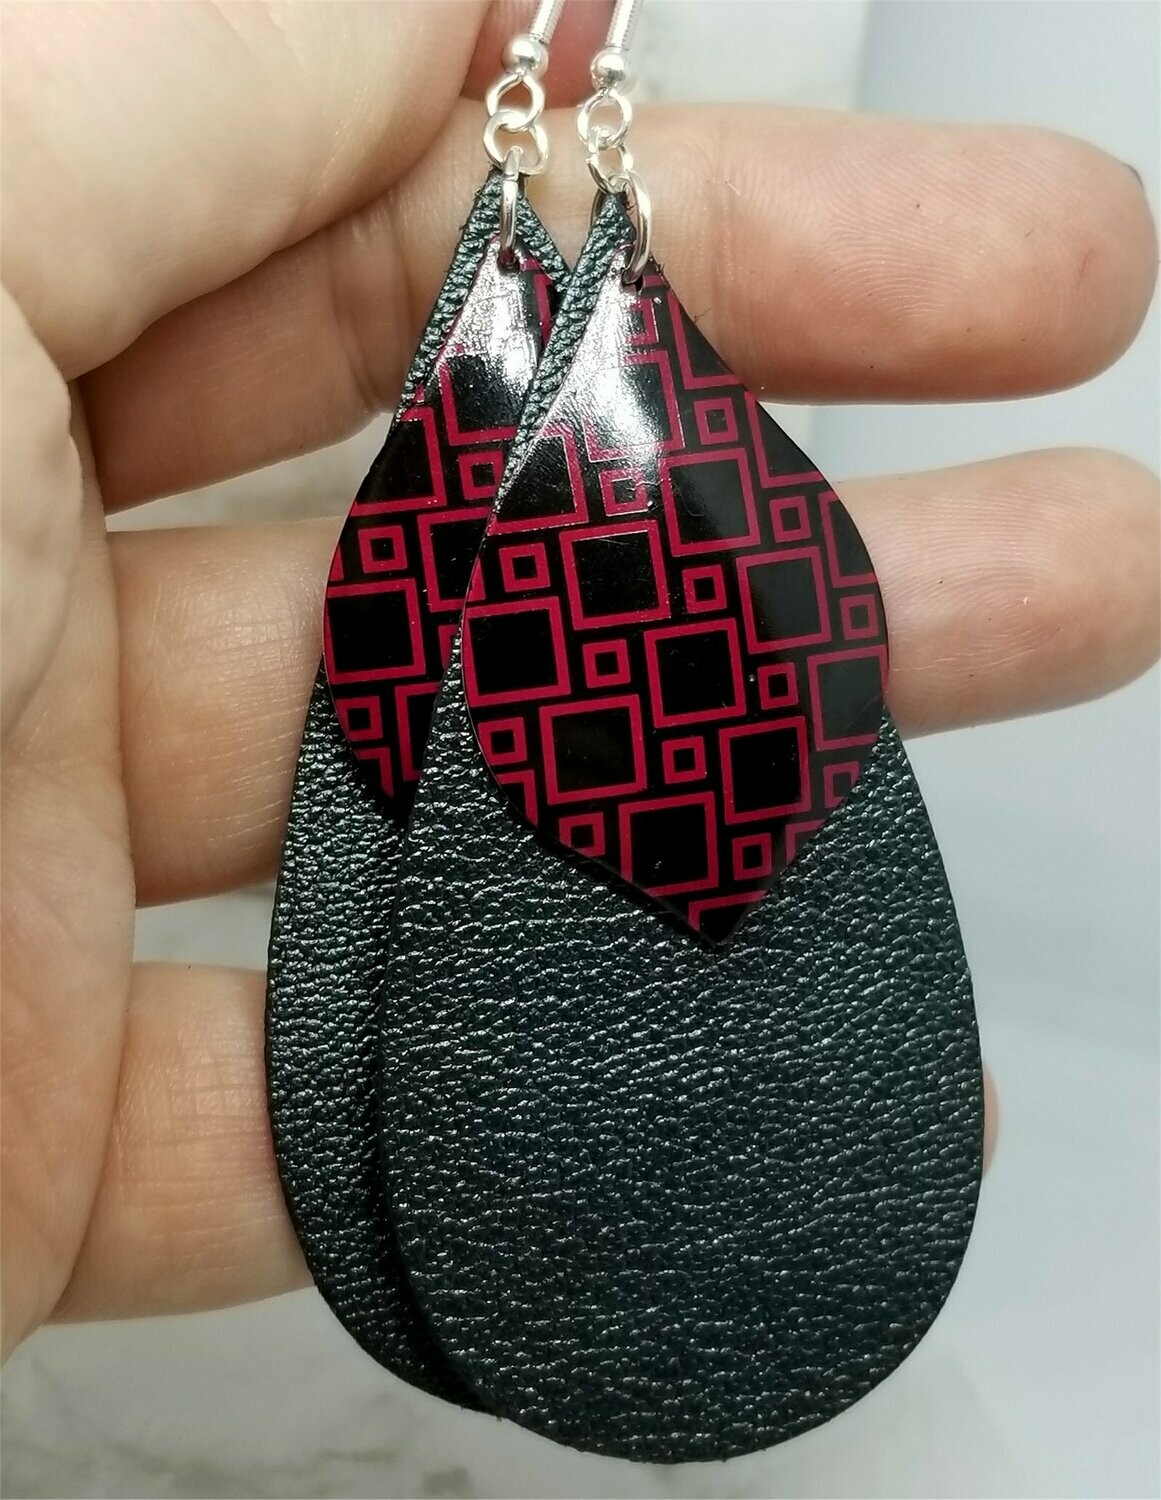 Black Elongated Teardrop Shaped Real Leather Earrings with Red and Black Pendant Overlays